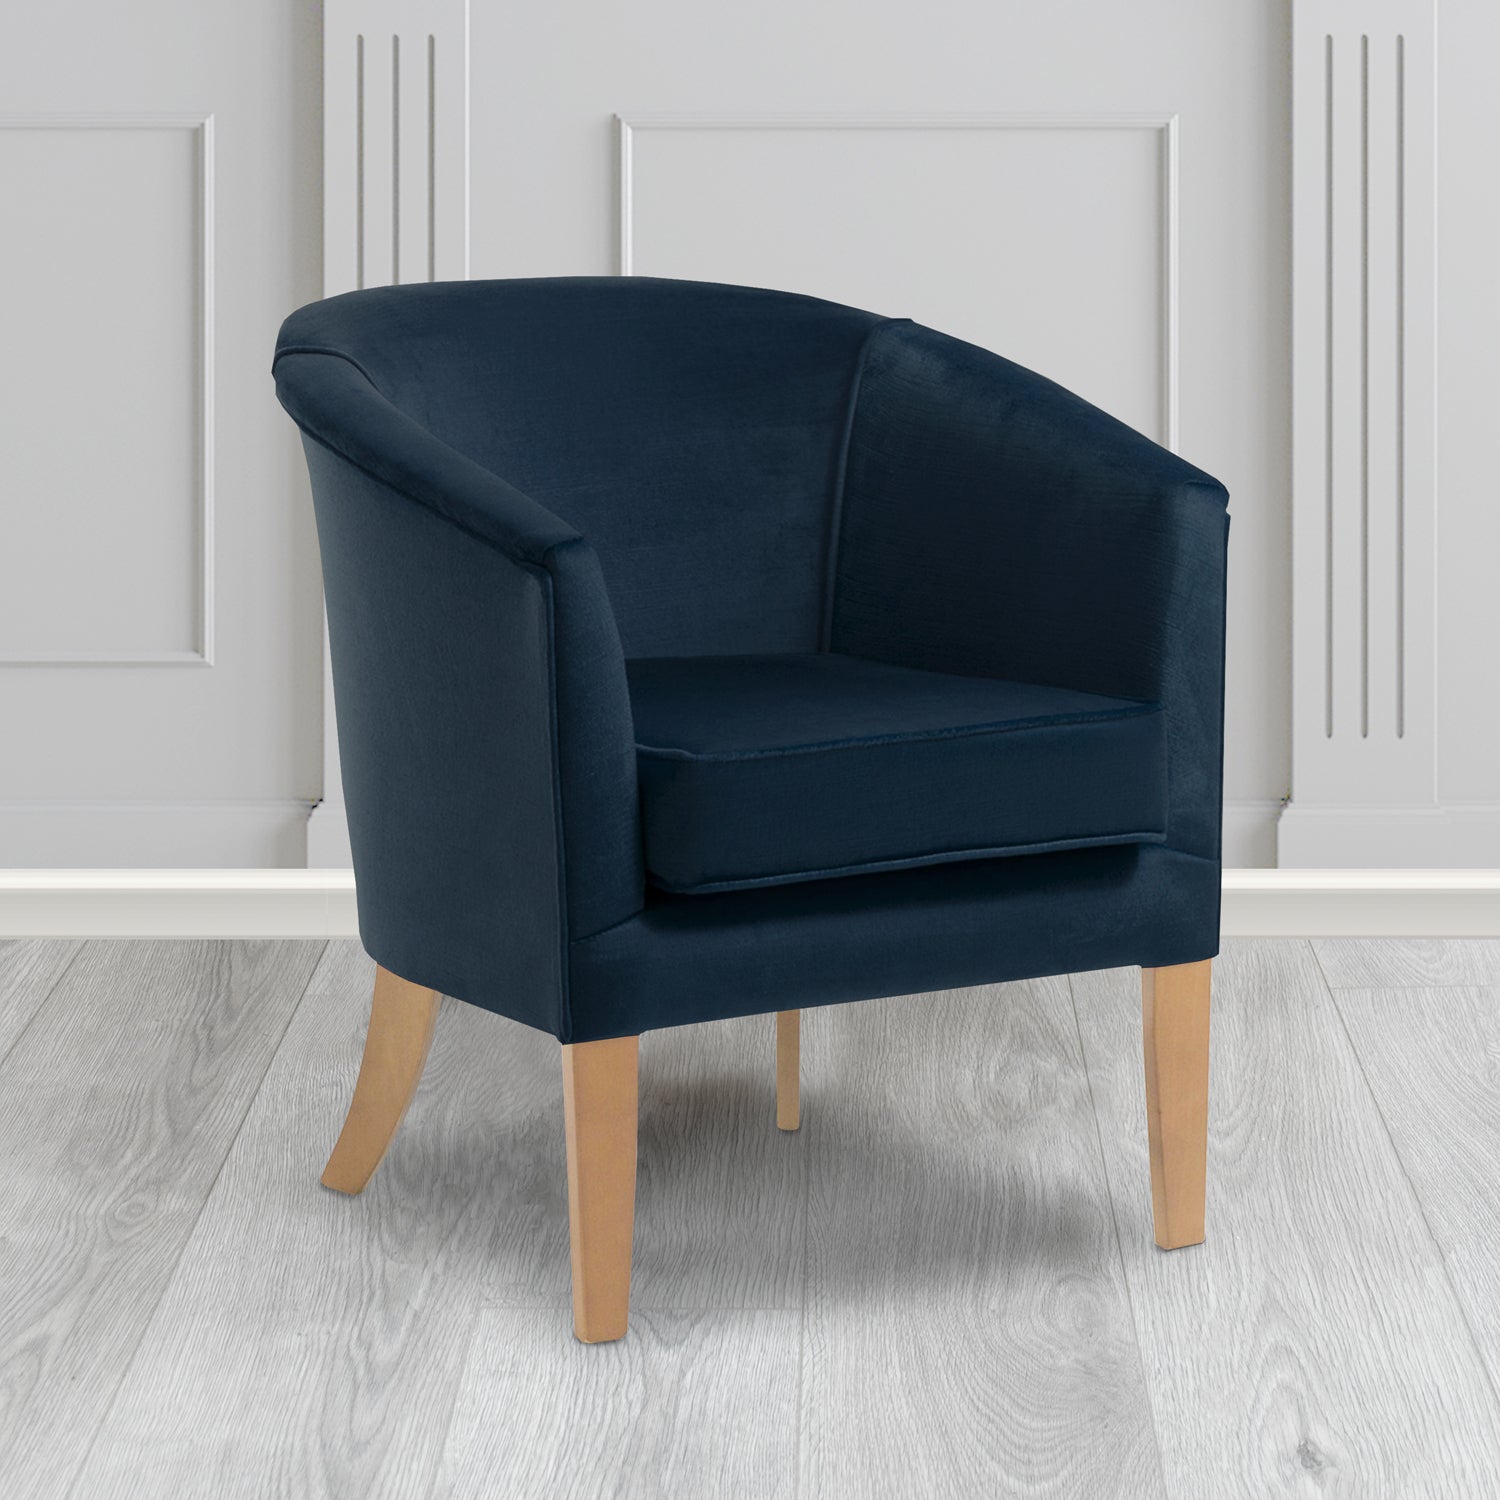 Jazz Tub Chair in Noble 192 Ink Crib 5 Velvet Fabric - Water Resistant - The Tub Chair Shop